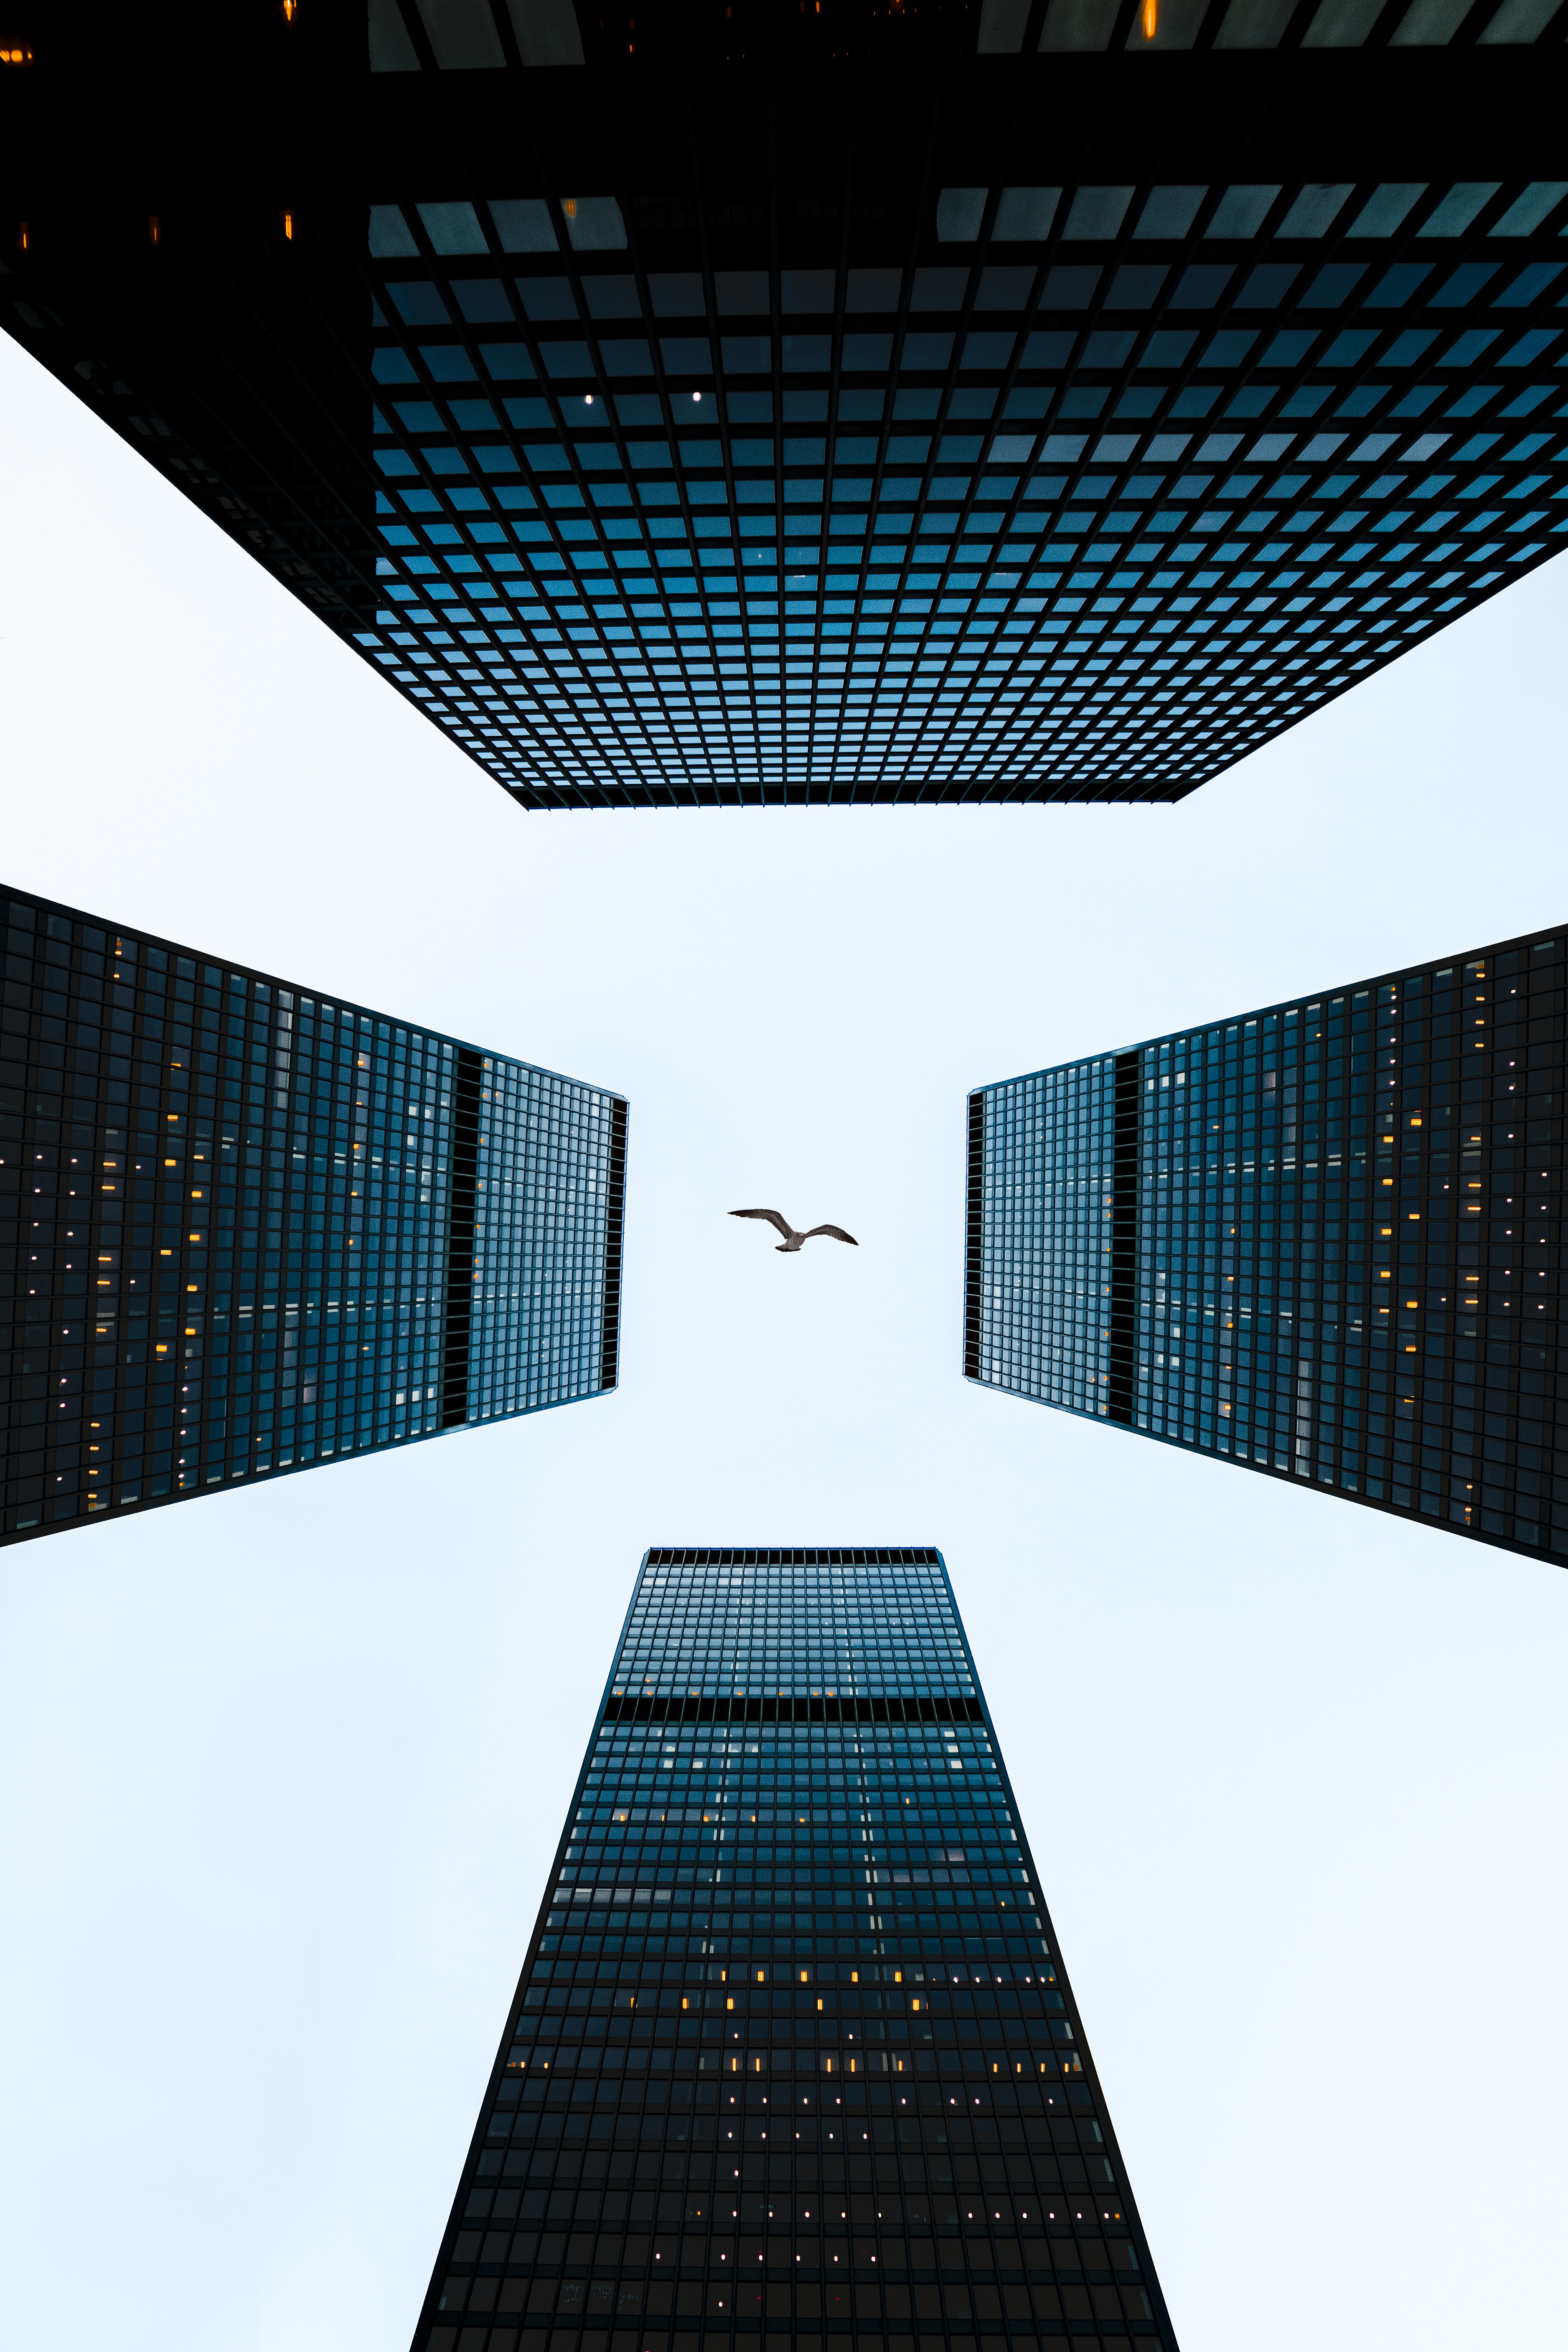 sky, architecture, building, bird, minimalism, skyscrapers, tower, towers